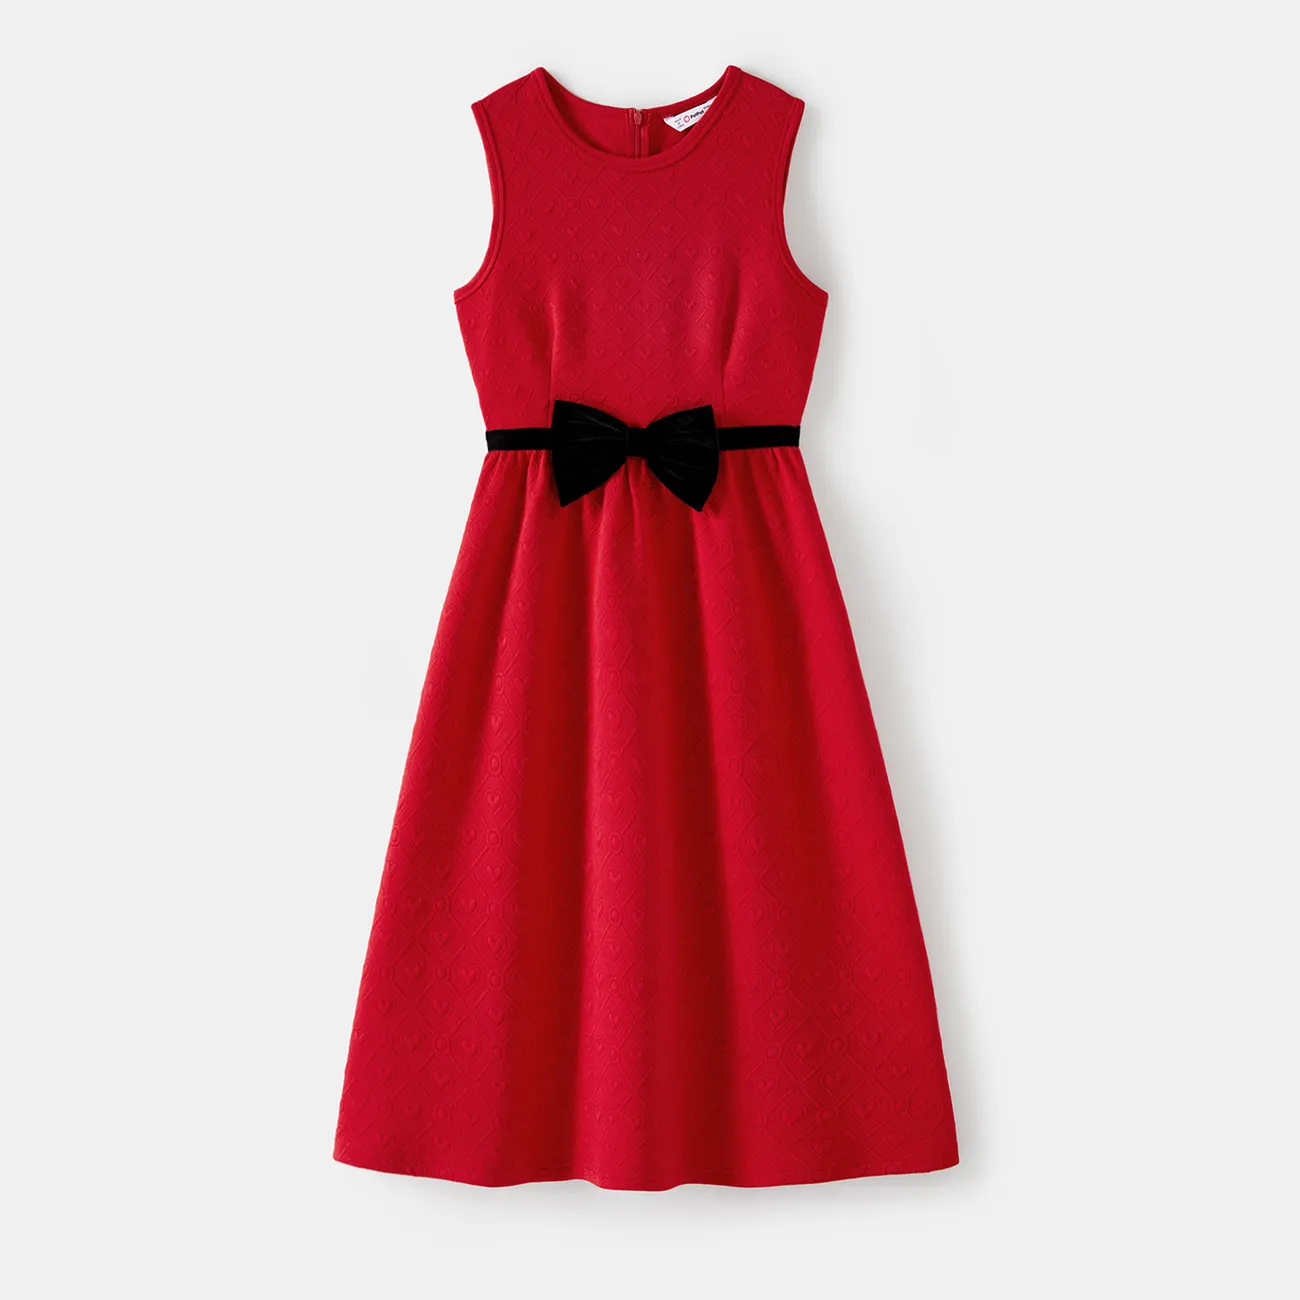 Family Matching Bow Front Red Heart Textured Tank Dresses and Long-sleeve Corduroy Shirts Sets Red big image 1